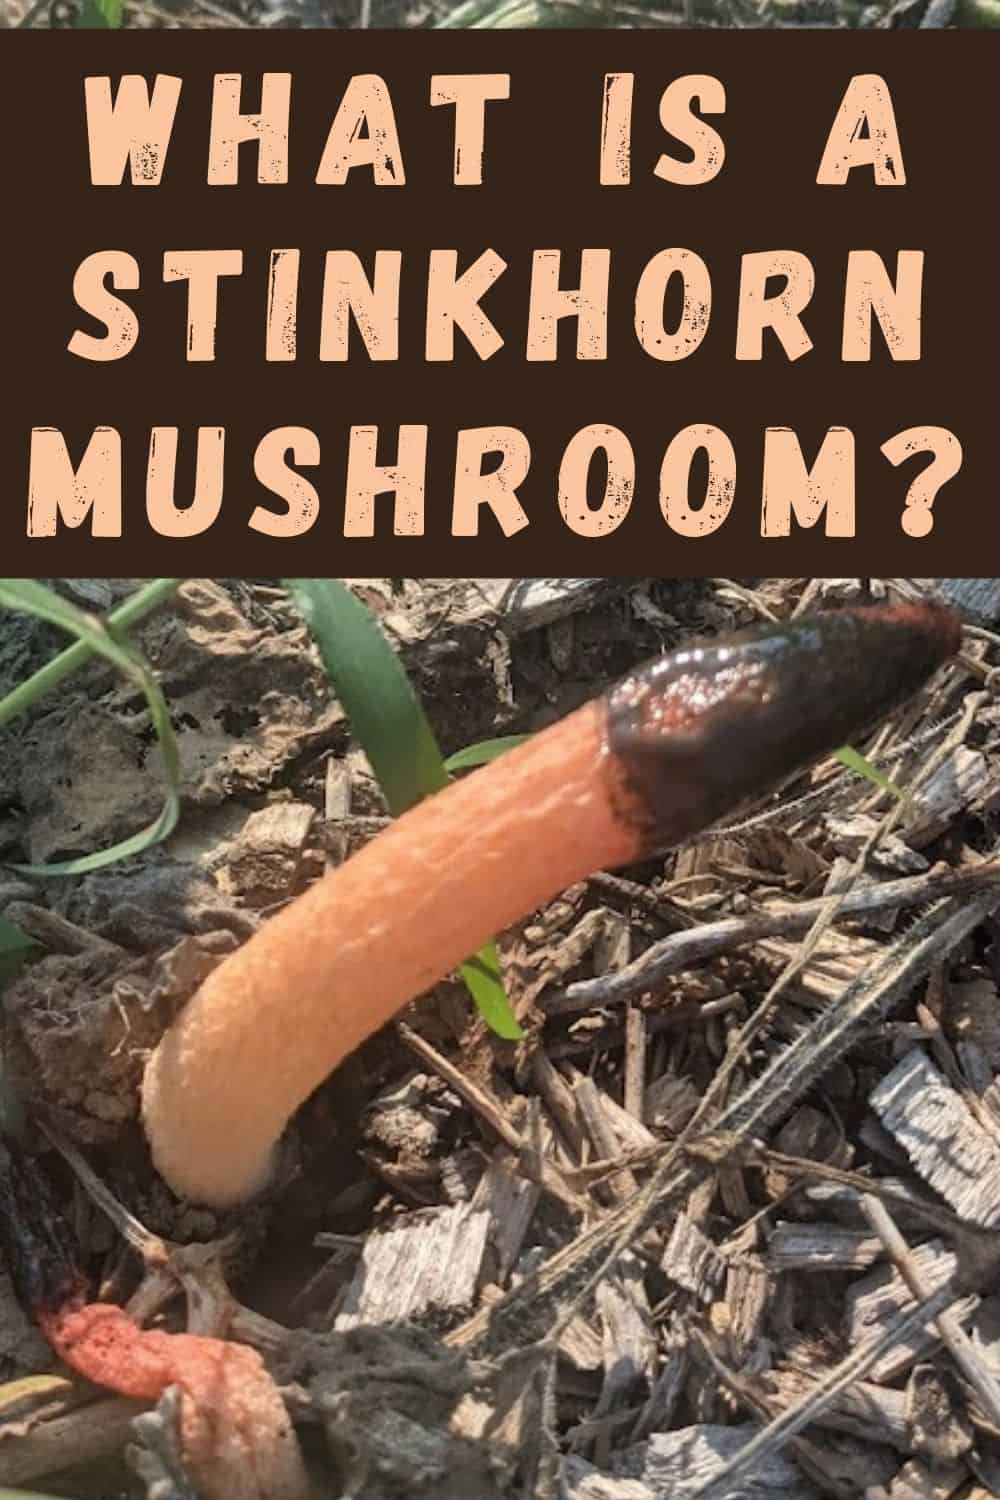 What is a stinkhorn mushroom